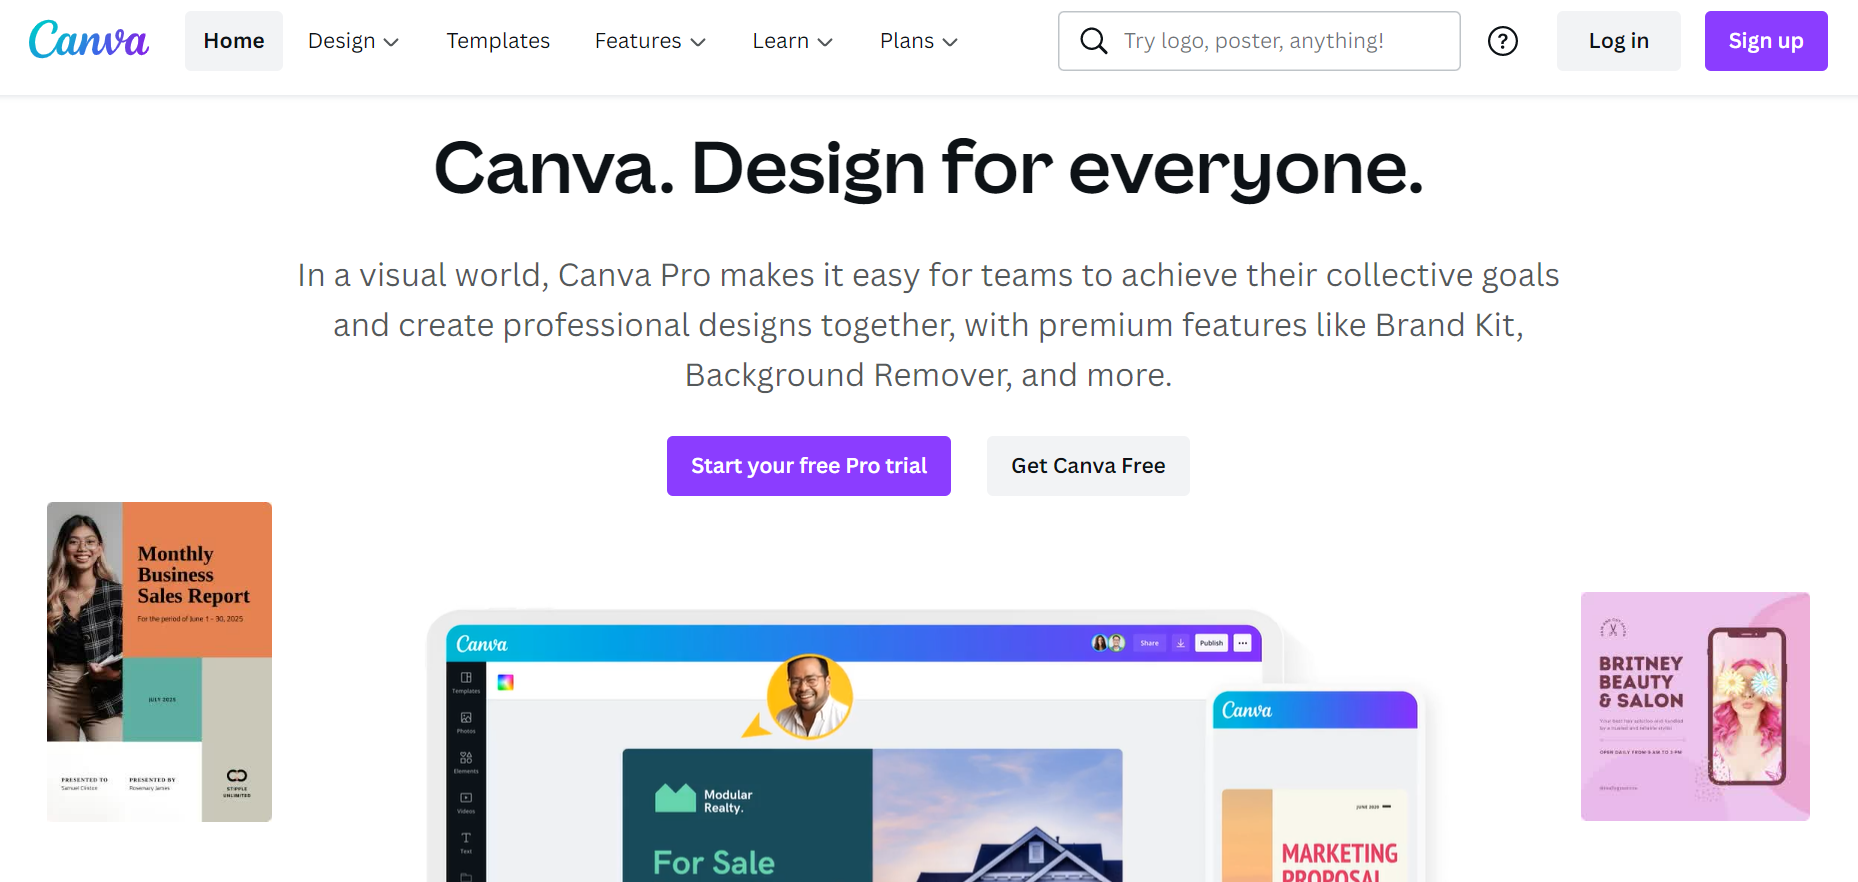 saas examples - canva